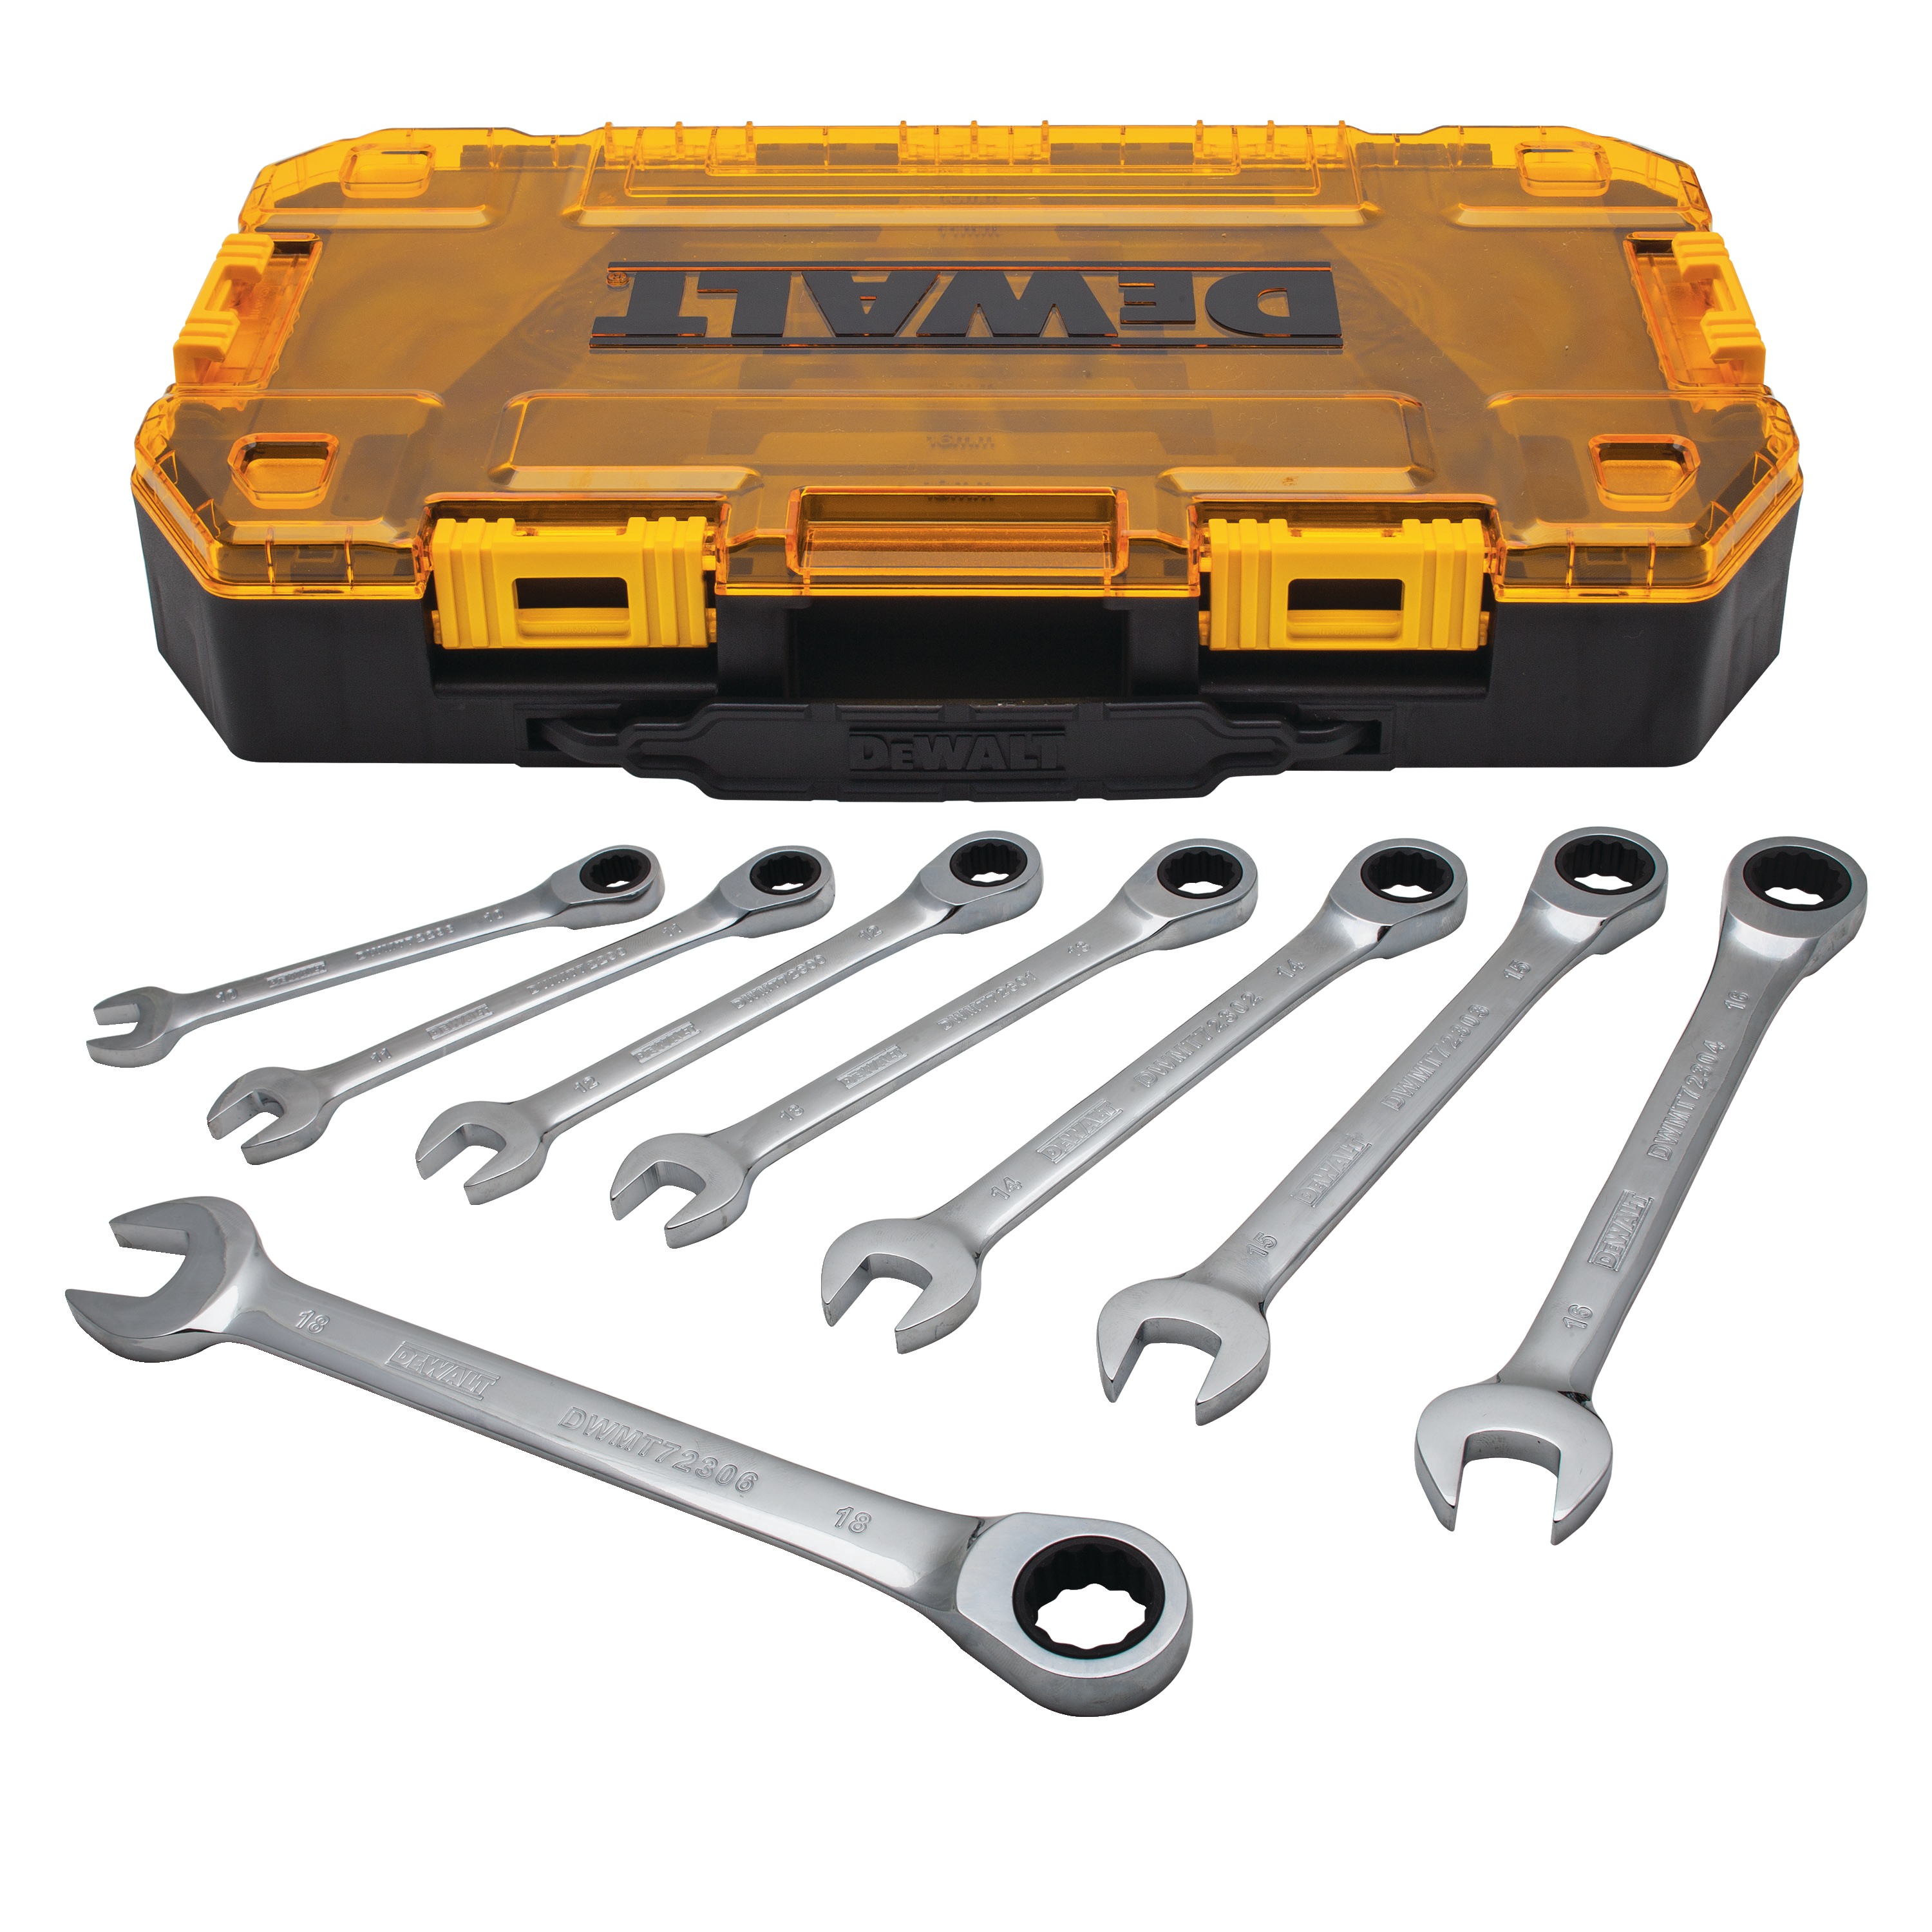 Profile of DEWALT 8 piece full polish ratcheting combination metric wrench set with its case.